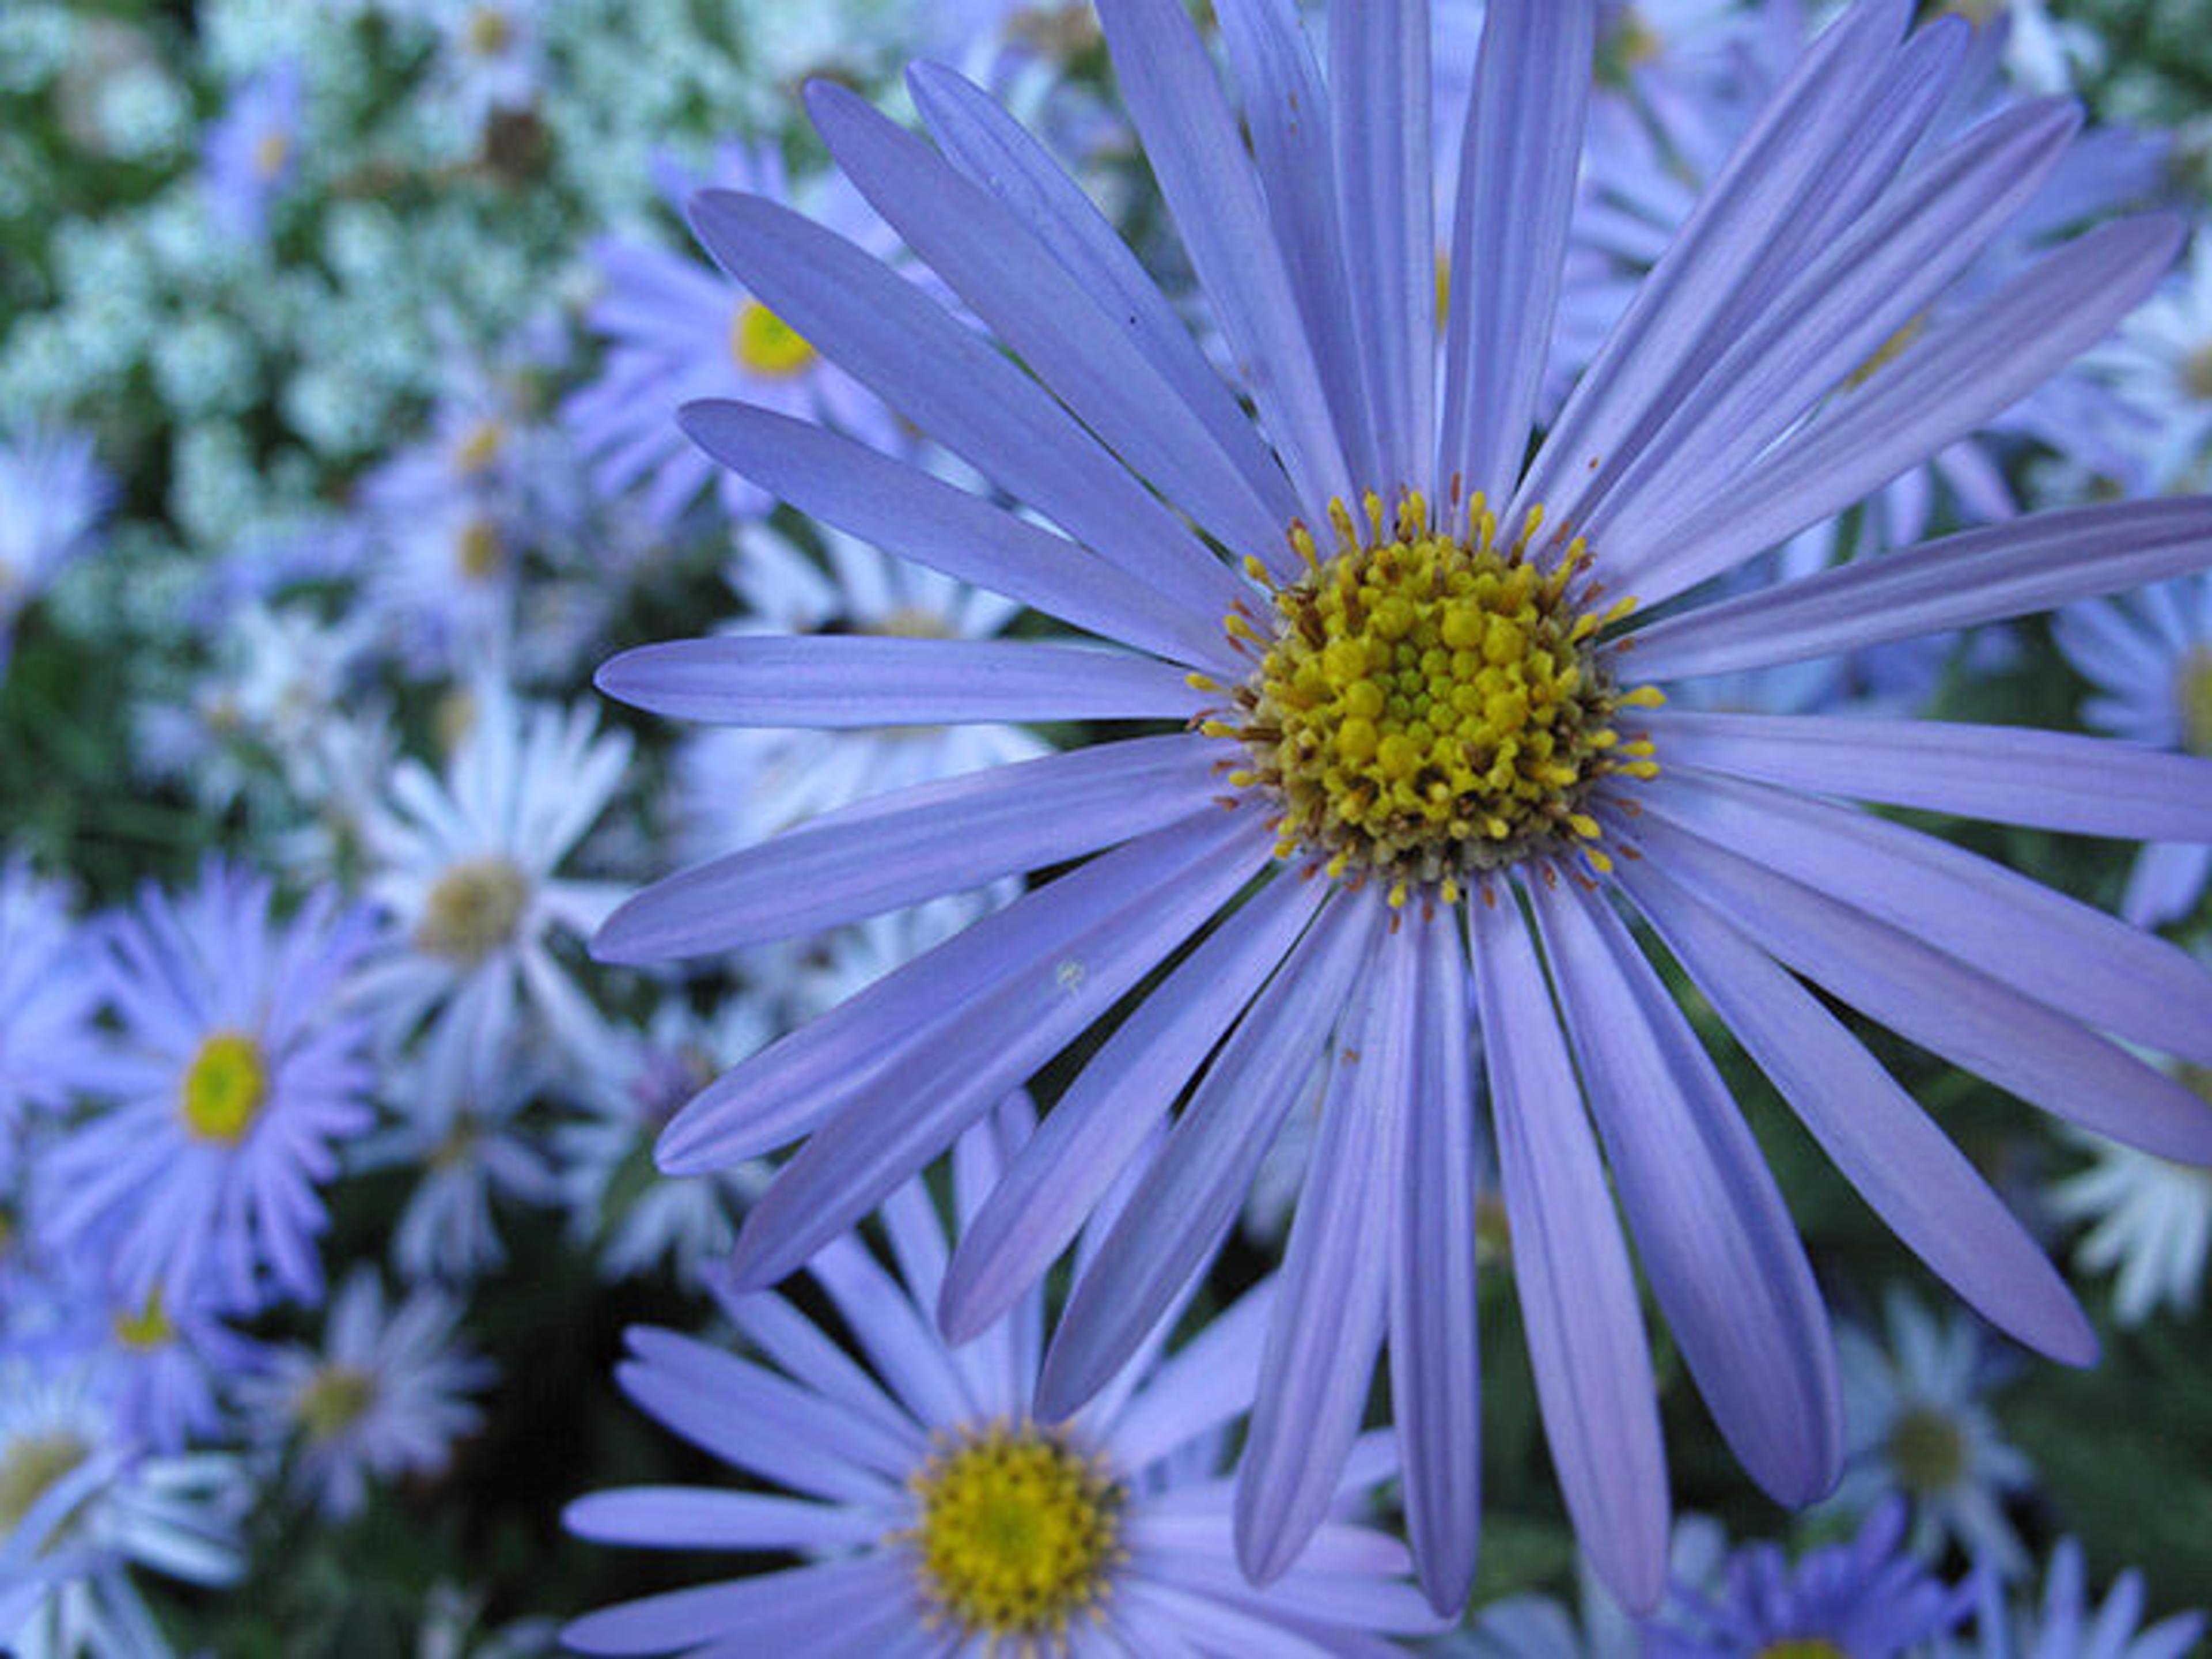 Purple flowers known as Aster amellus